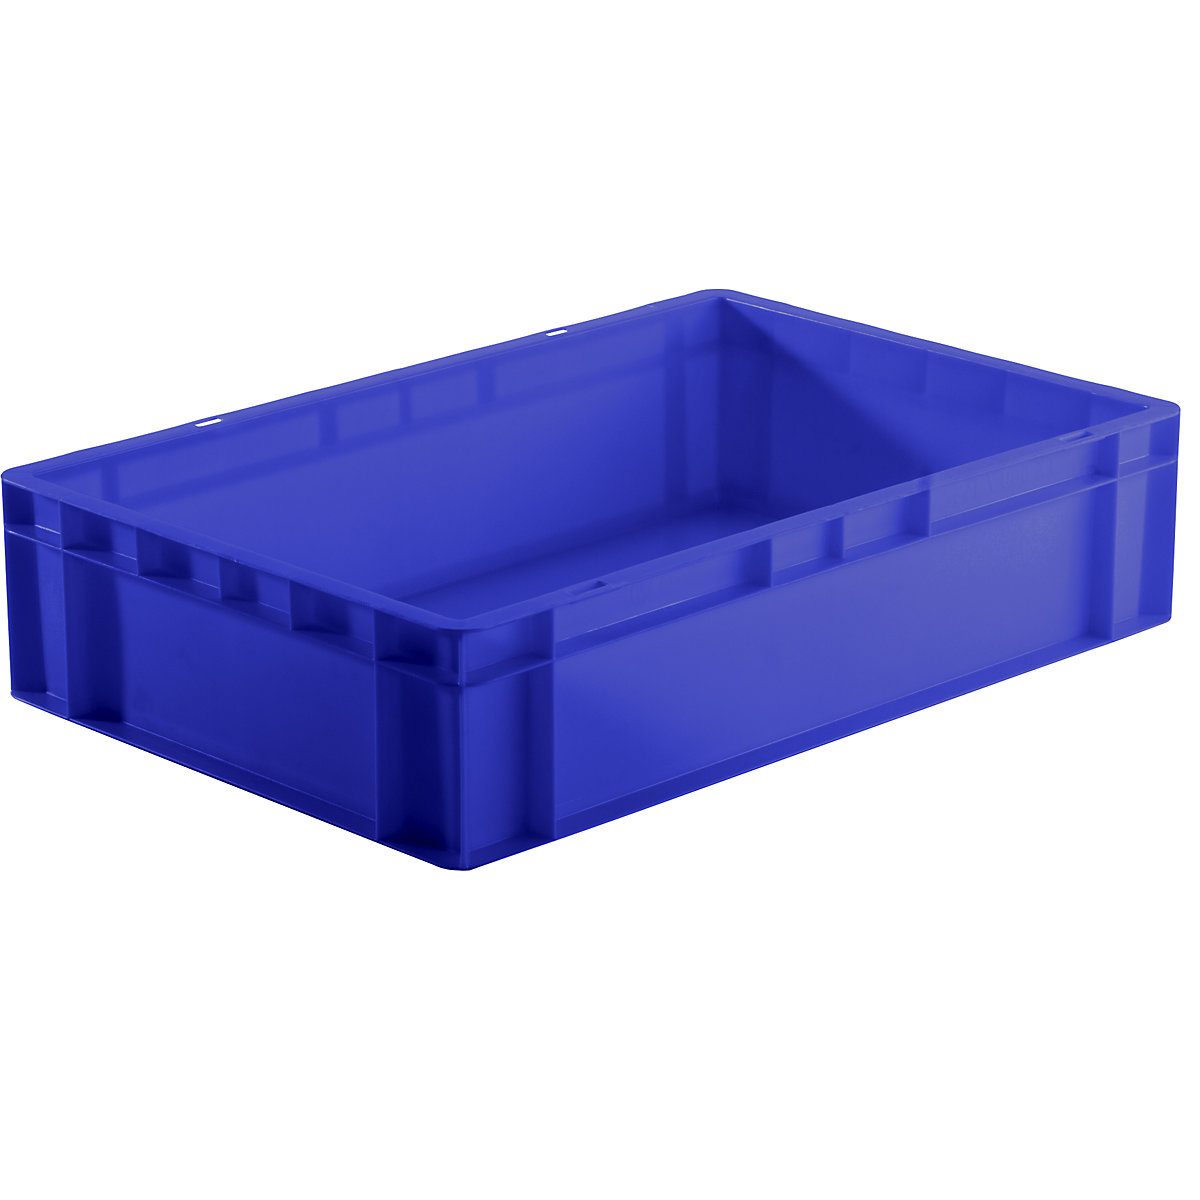 Euro stacking container, closed walls and base, LxWxH 600 x 400 x 145 mm, blue, pack of 5-7